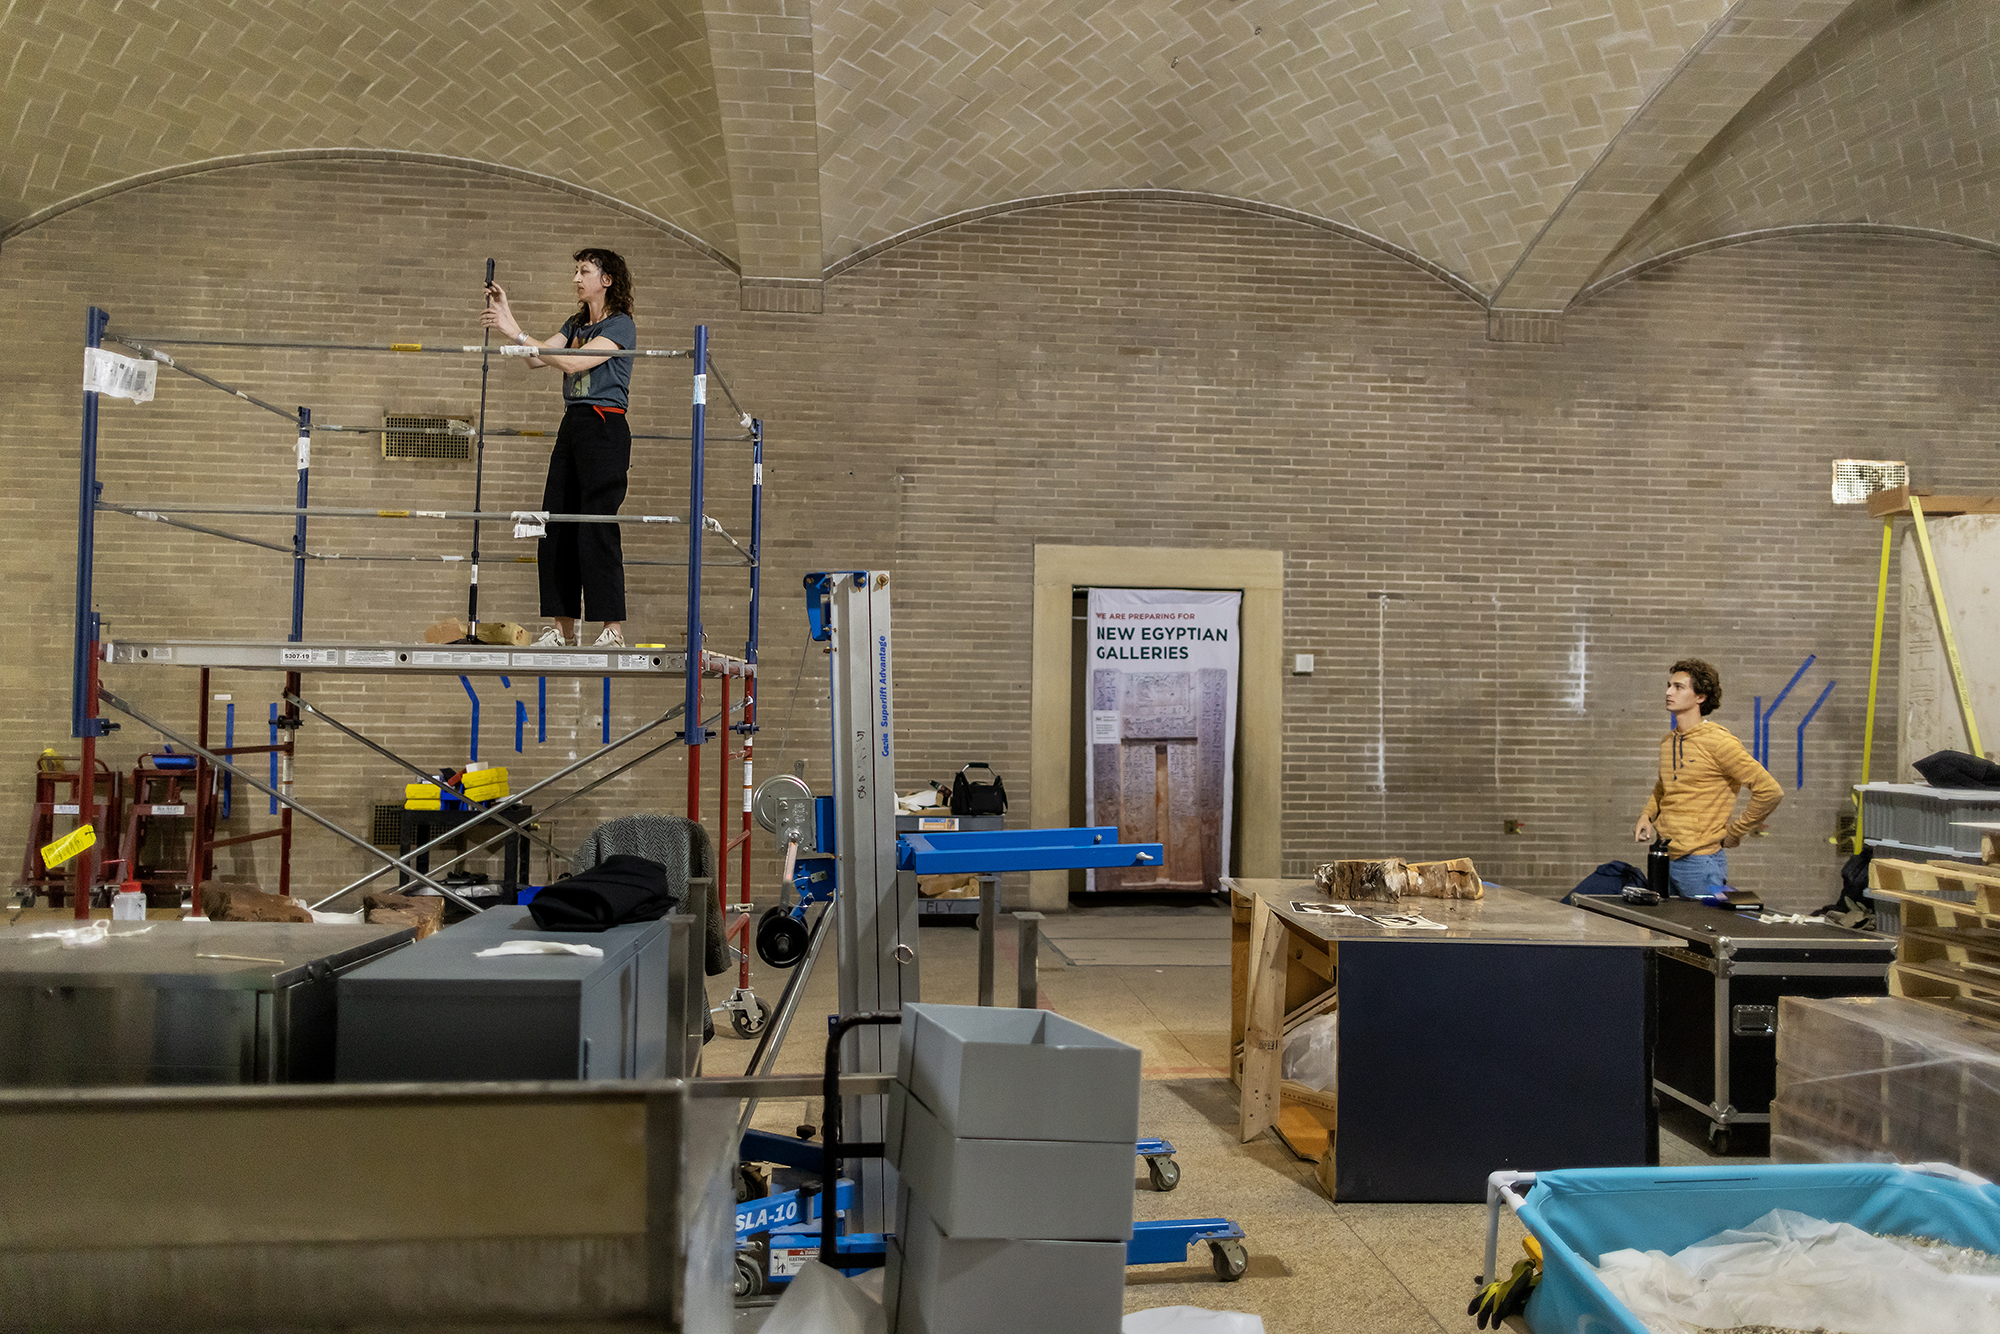 Molly Gleeson stands on scaffolding in the Penn Museum setting up VR equipment.